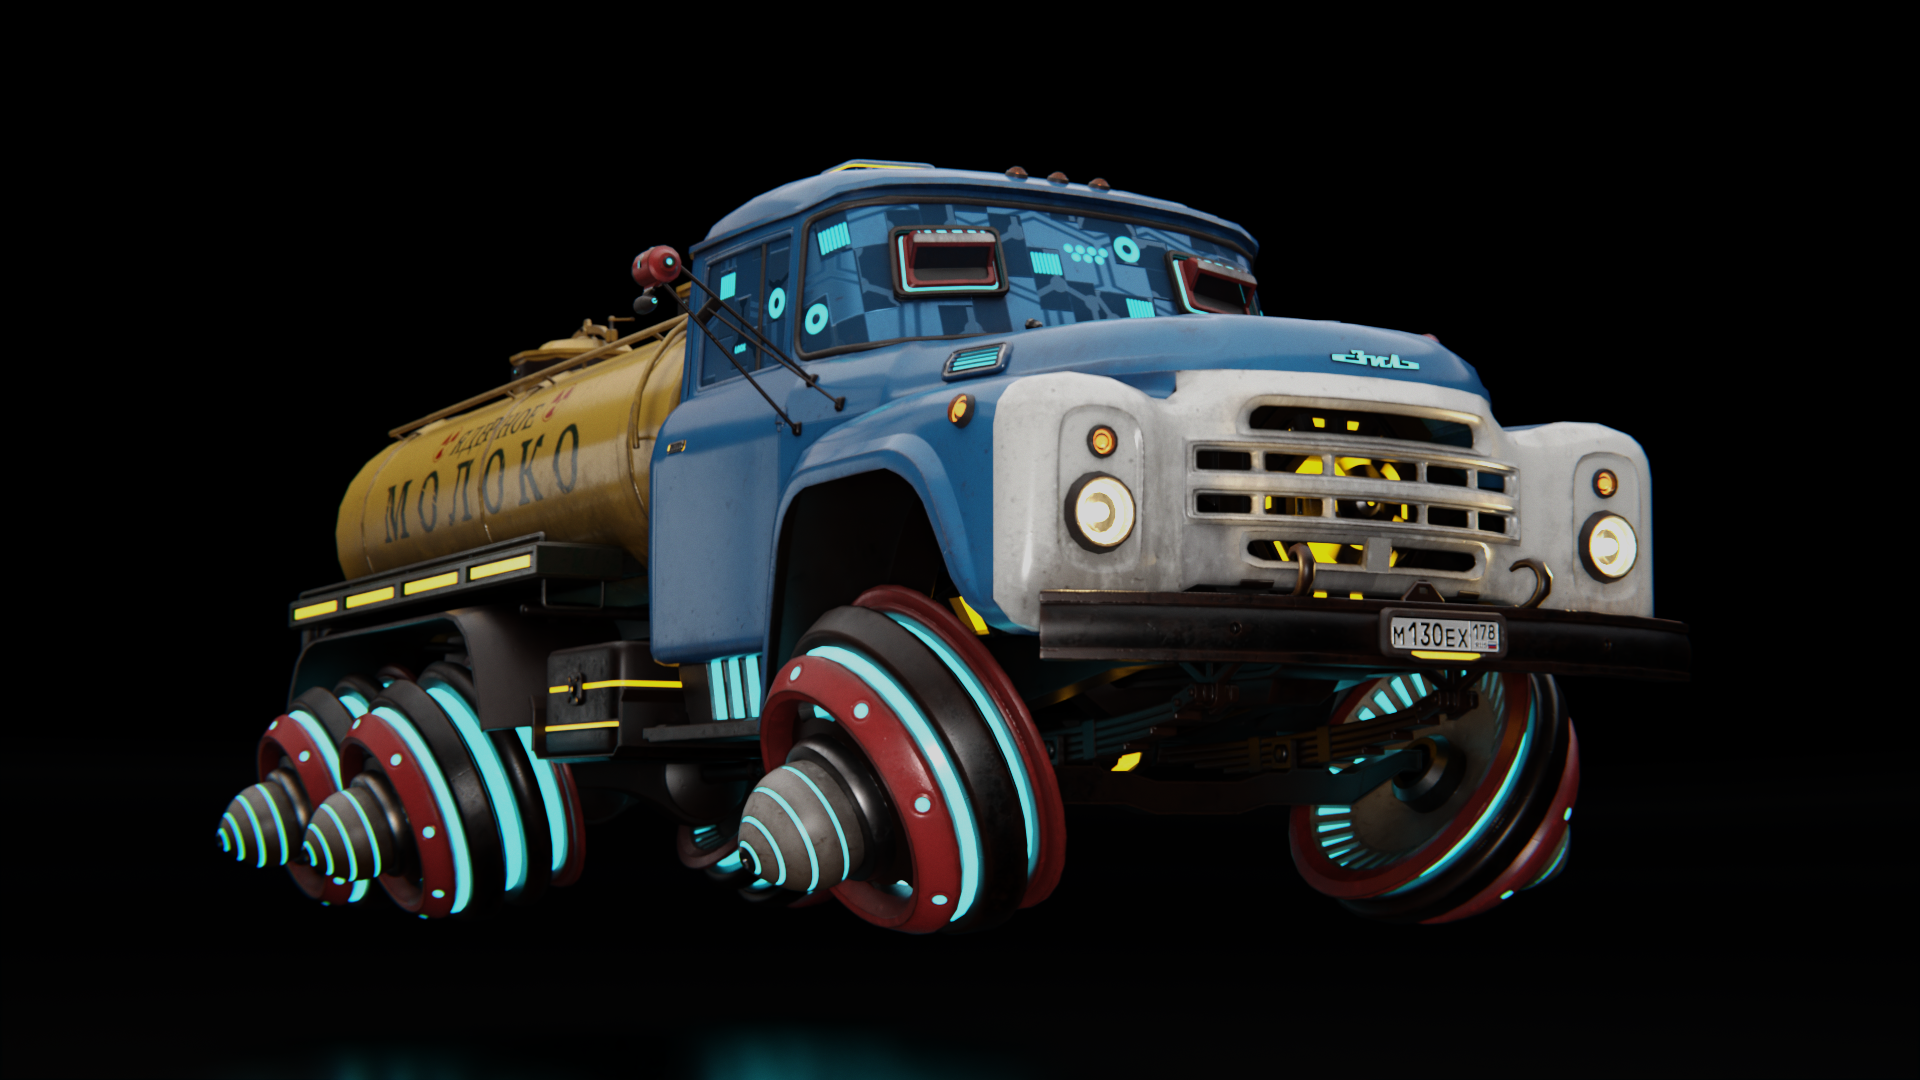 Cybertruck 2077 preview image 2